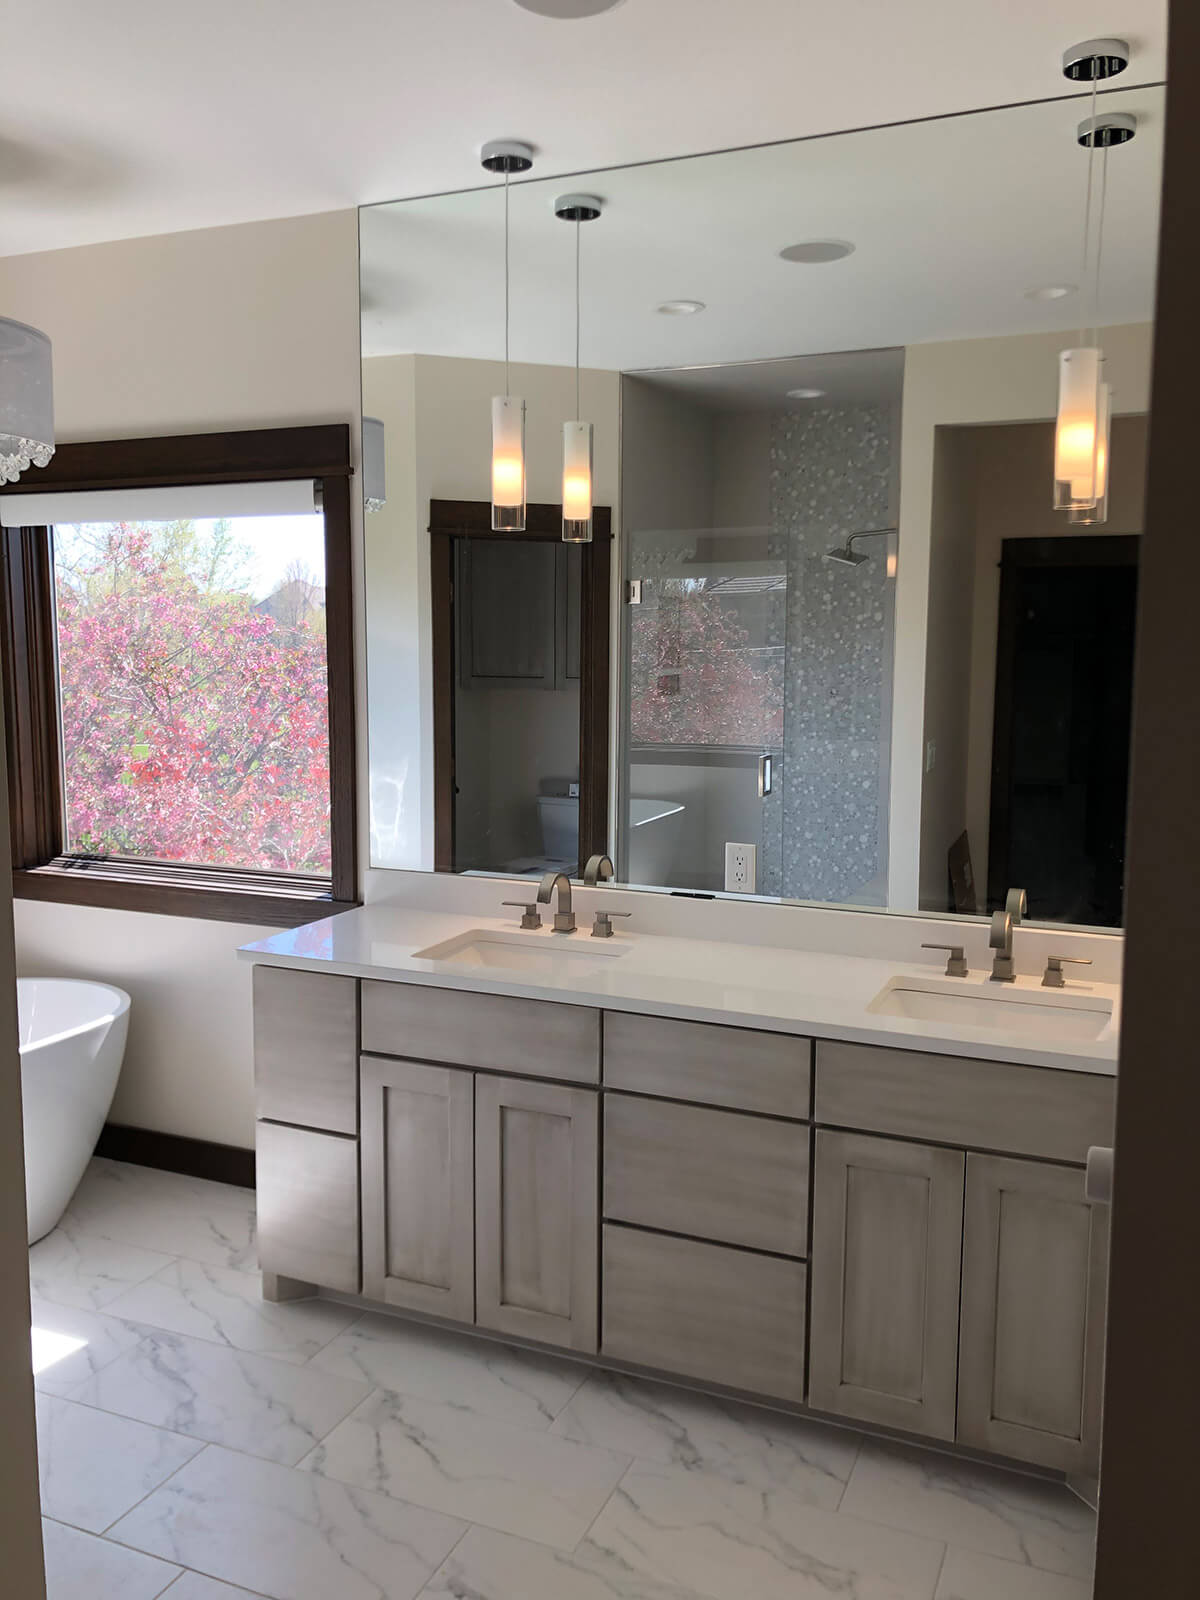 Light wood double vanity with white countertops and large wall mirror.